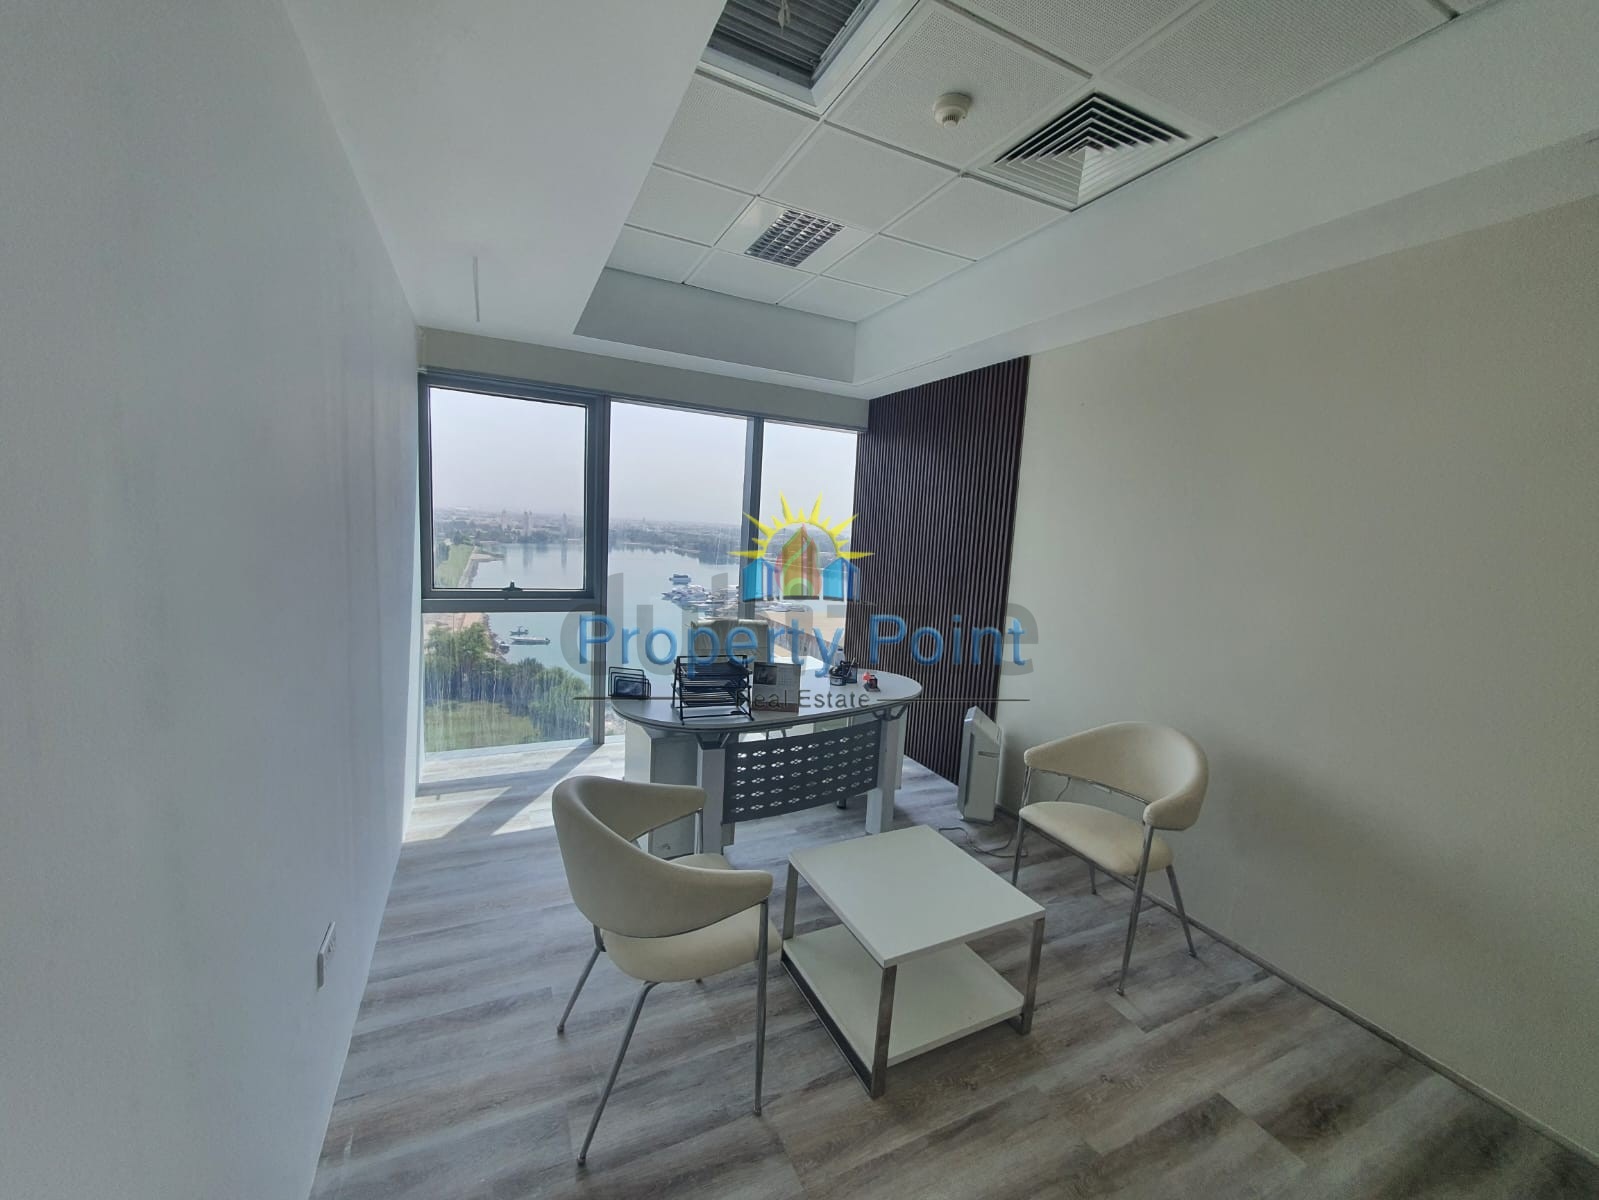 Office Space For A Low As Aed 13,000 | Furnished | Addc And Internet Included